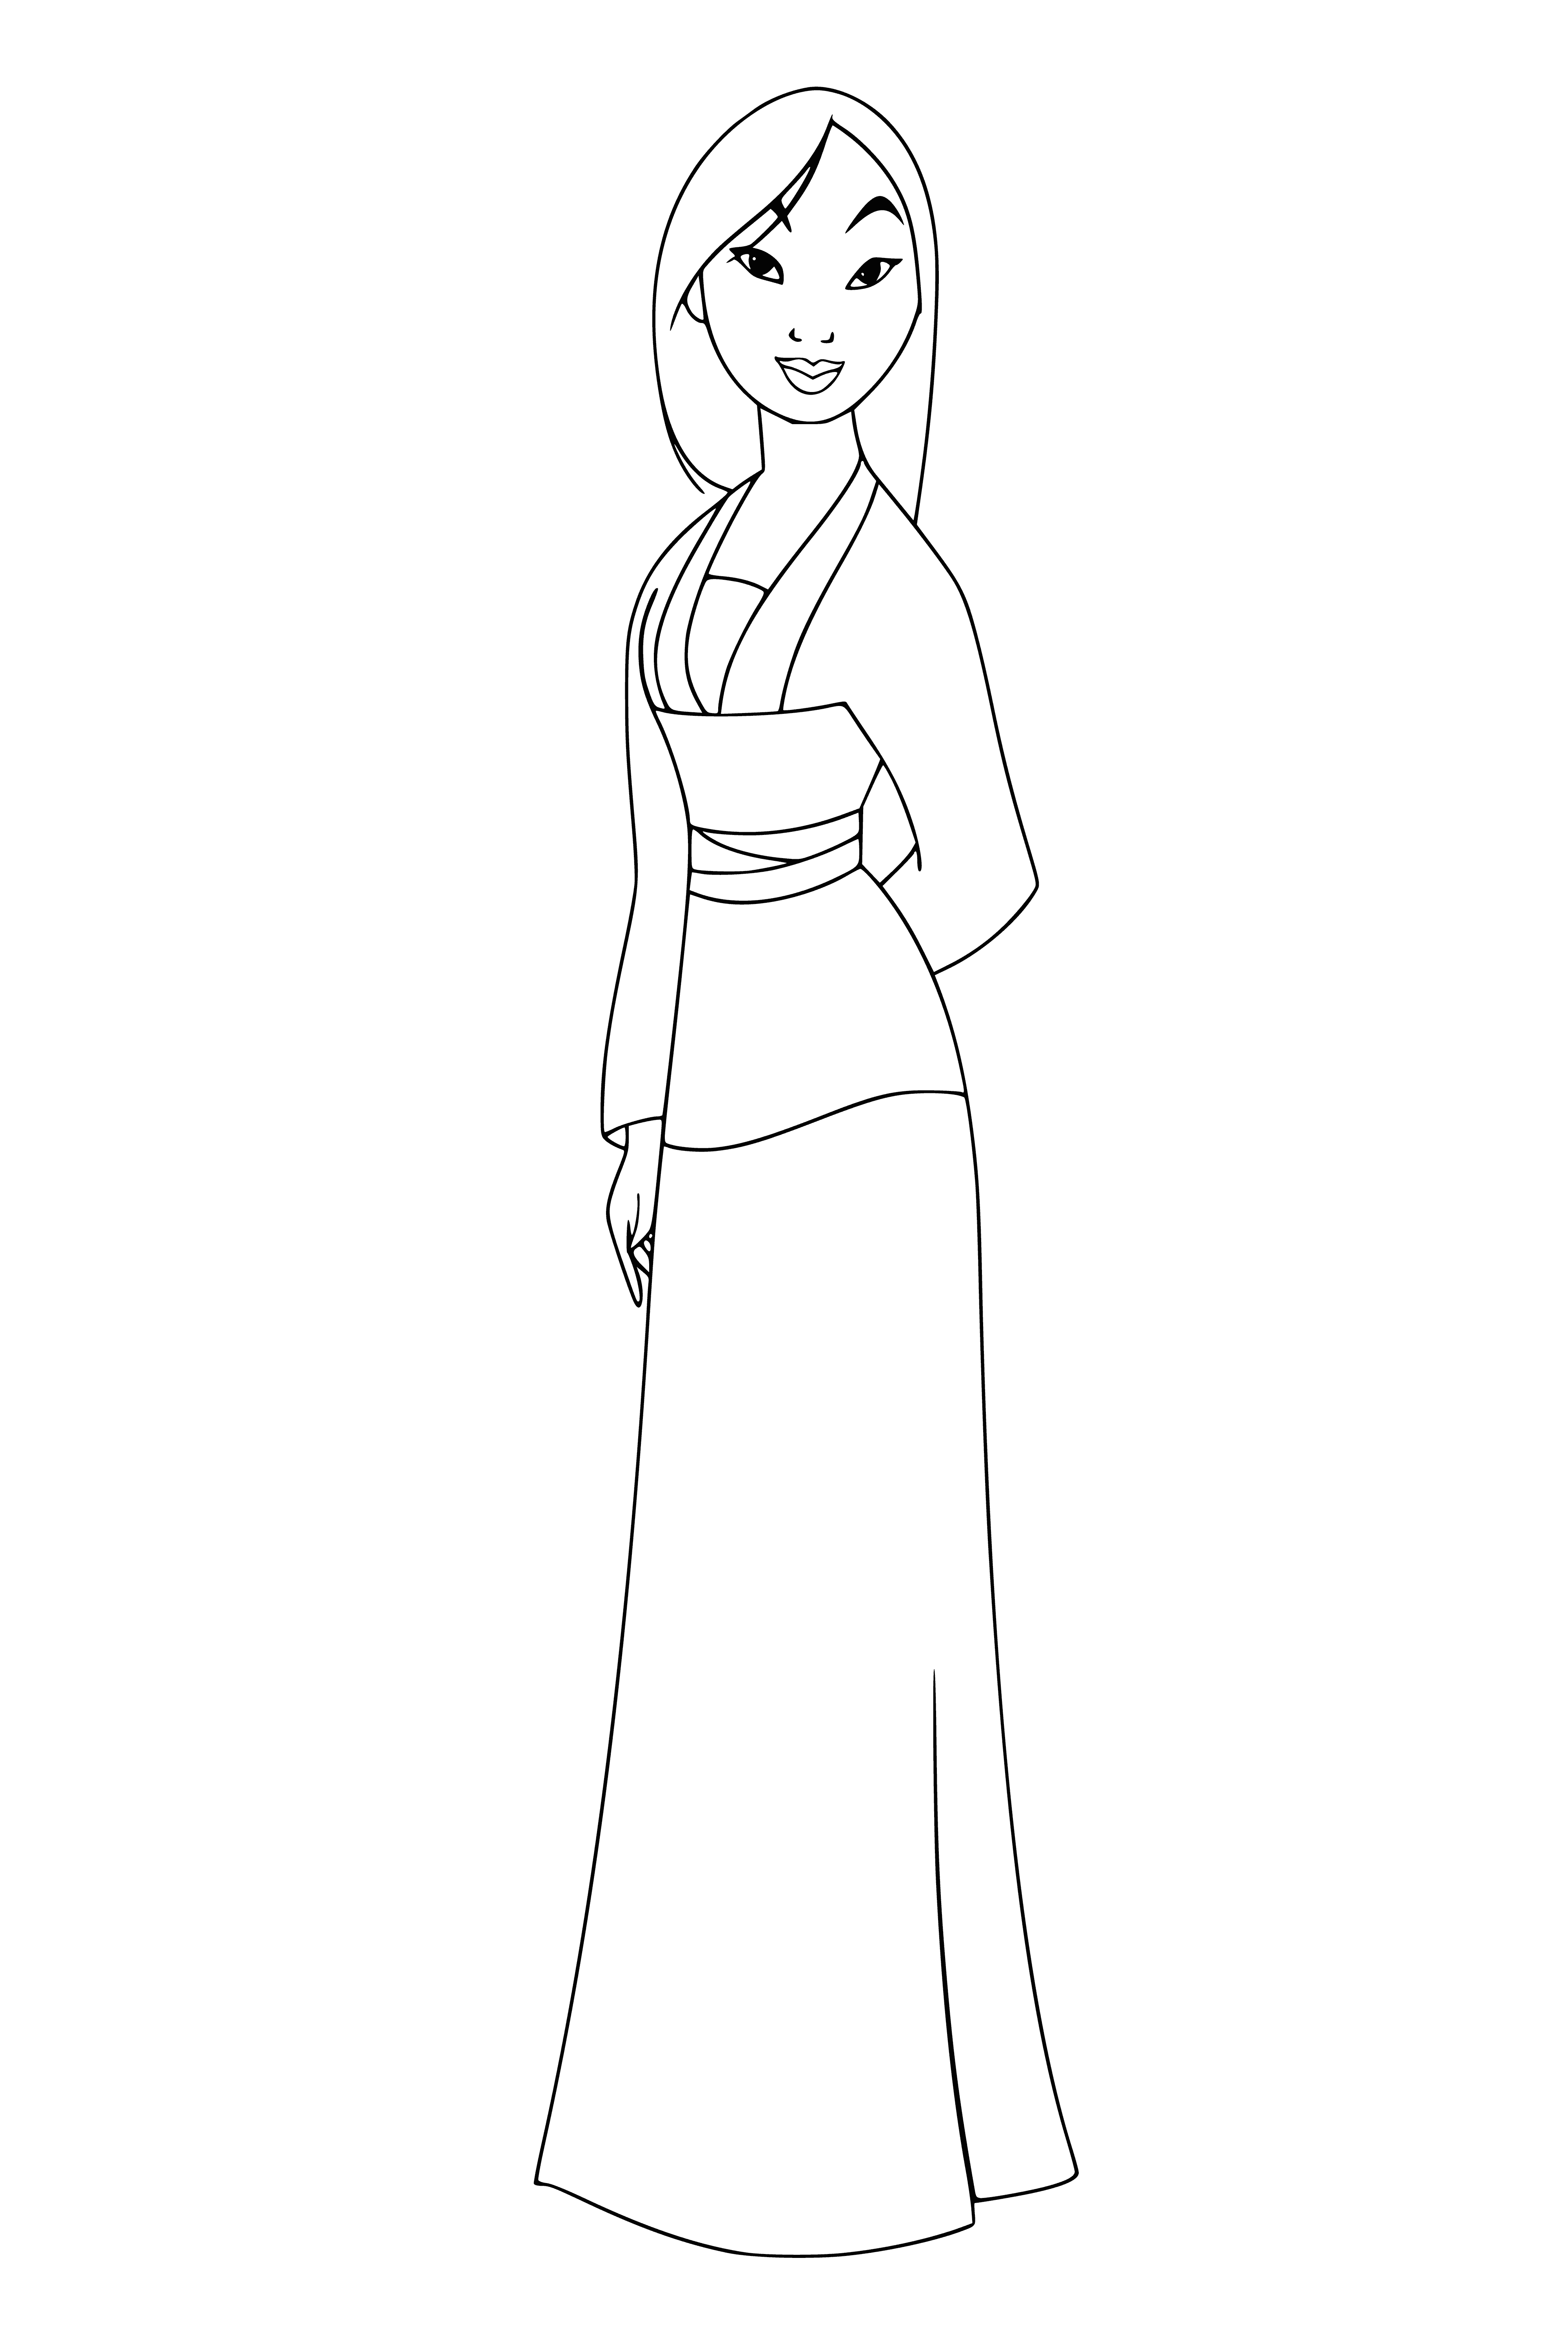 coloring page: Princess Mulan stands determined in a traditional Chinese dress, ready to take on whatever challenges await her.